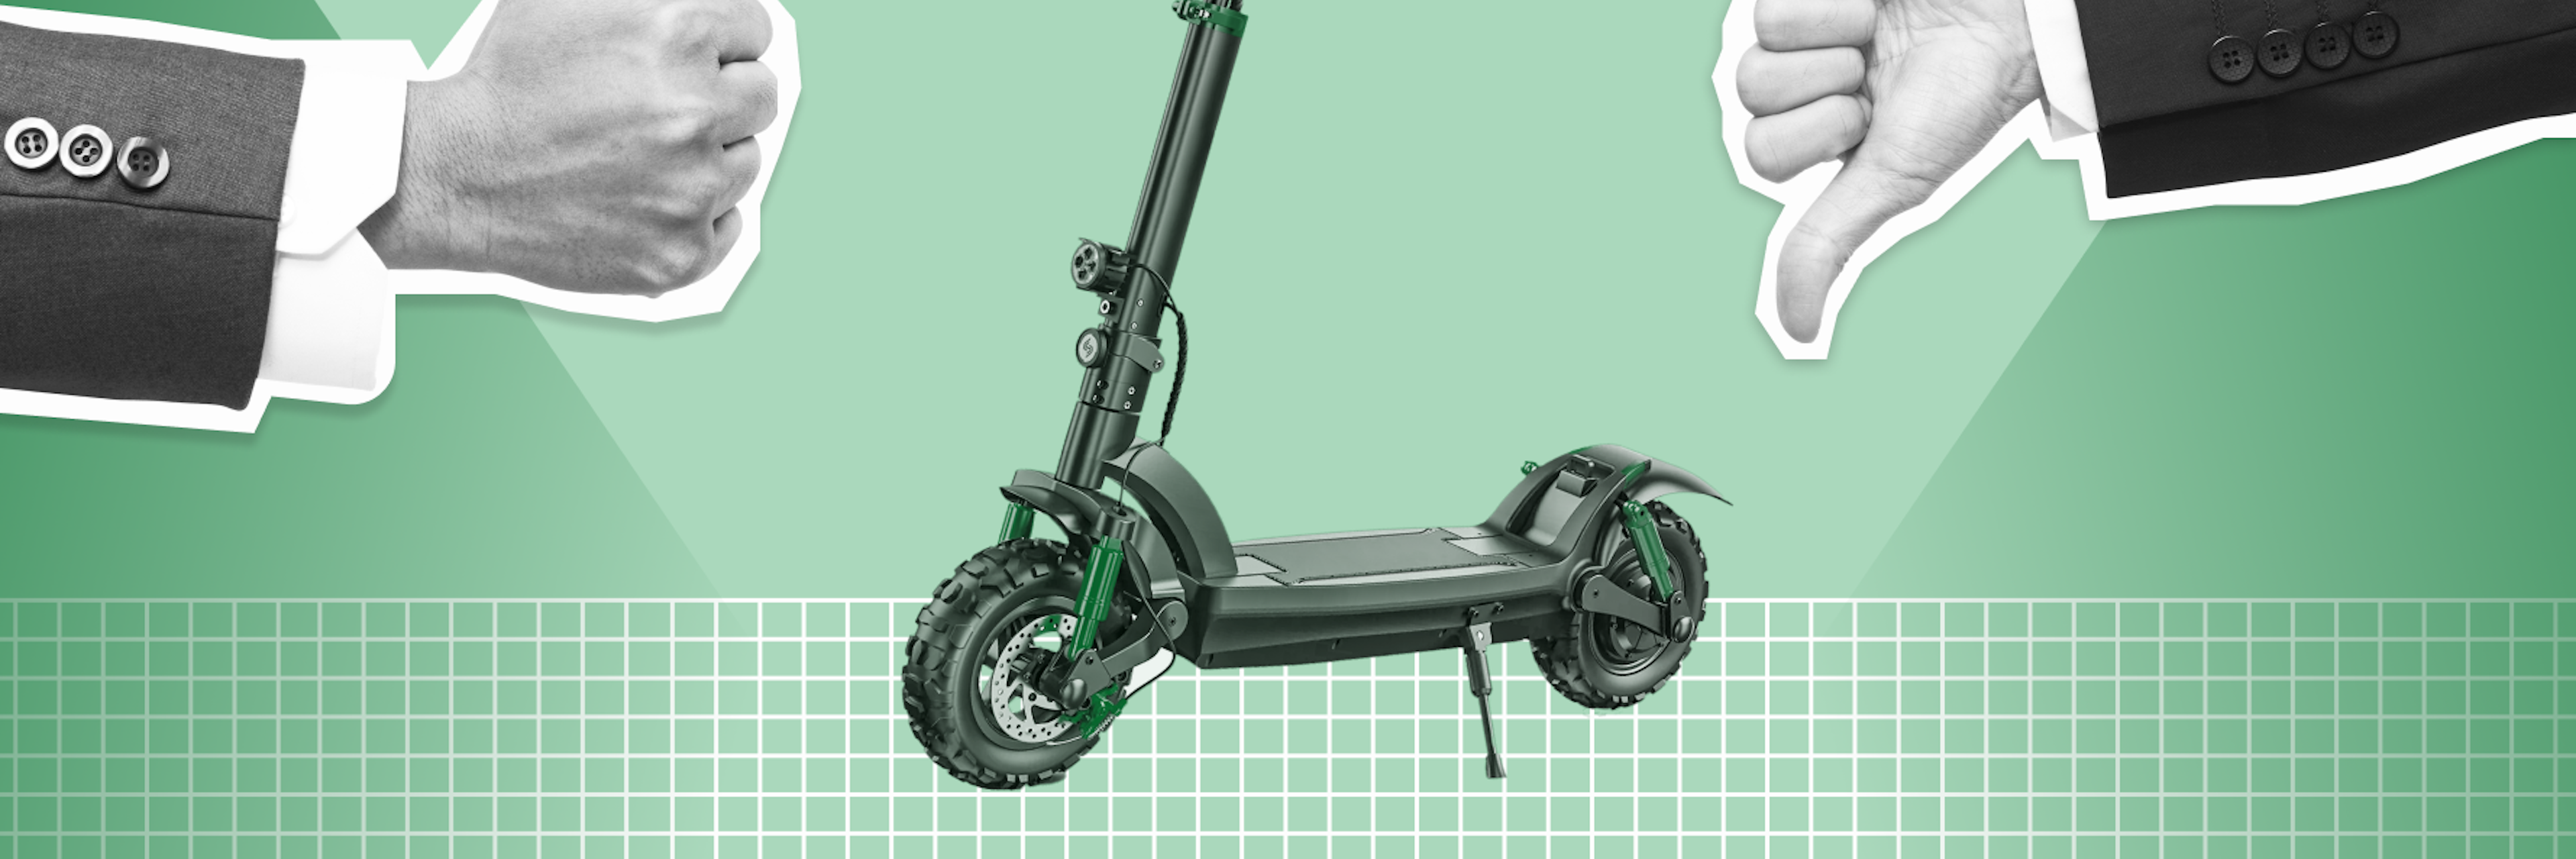 A scooter cut out on a green background with a thumbs up on one side, and a thumbs down on the other.